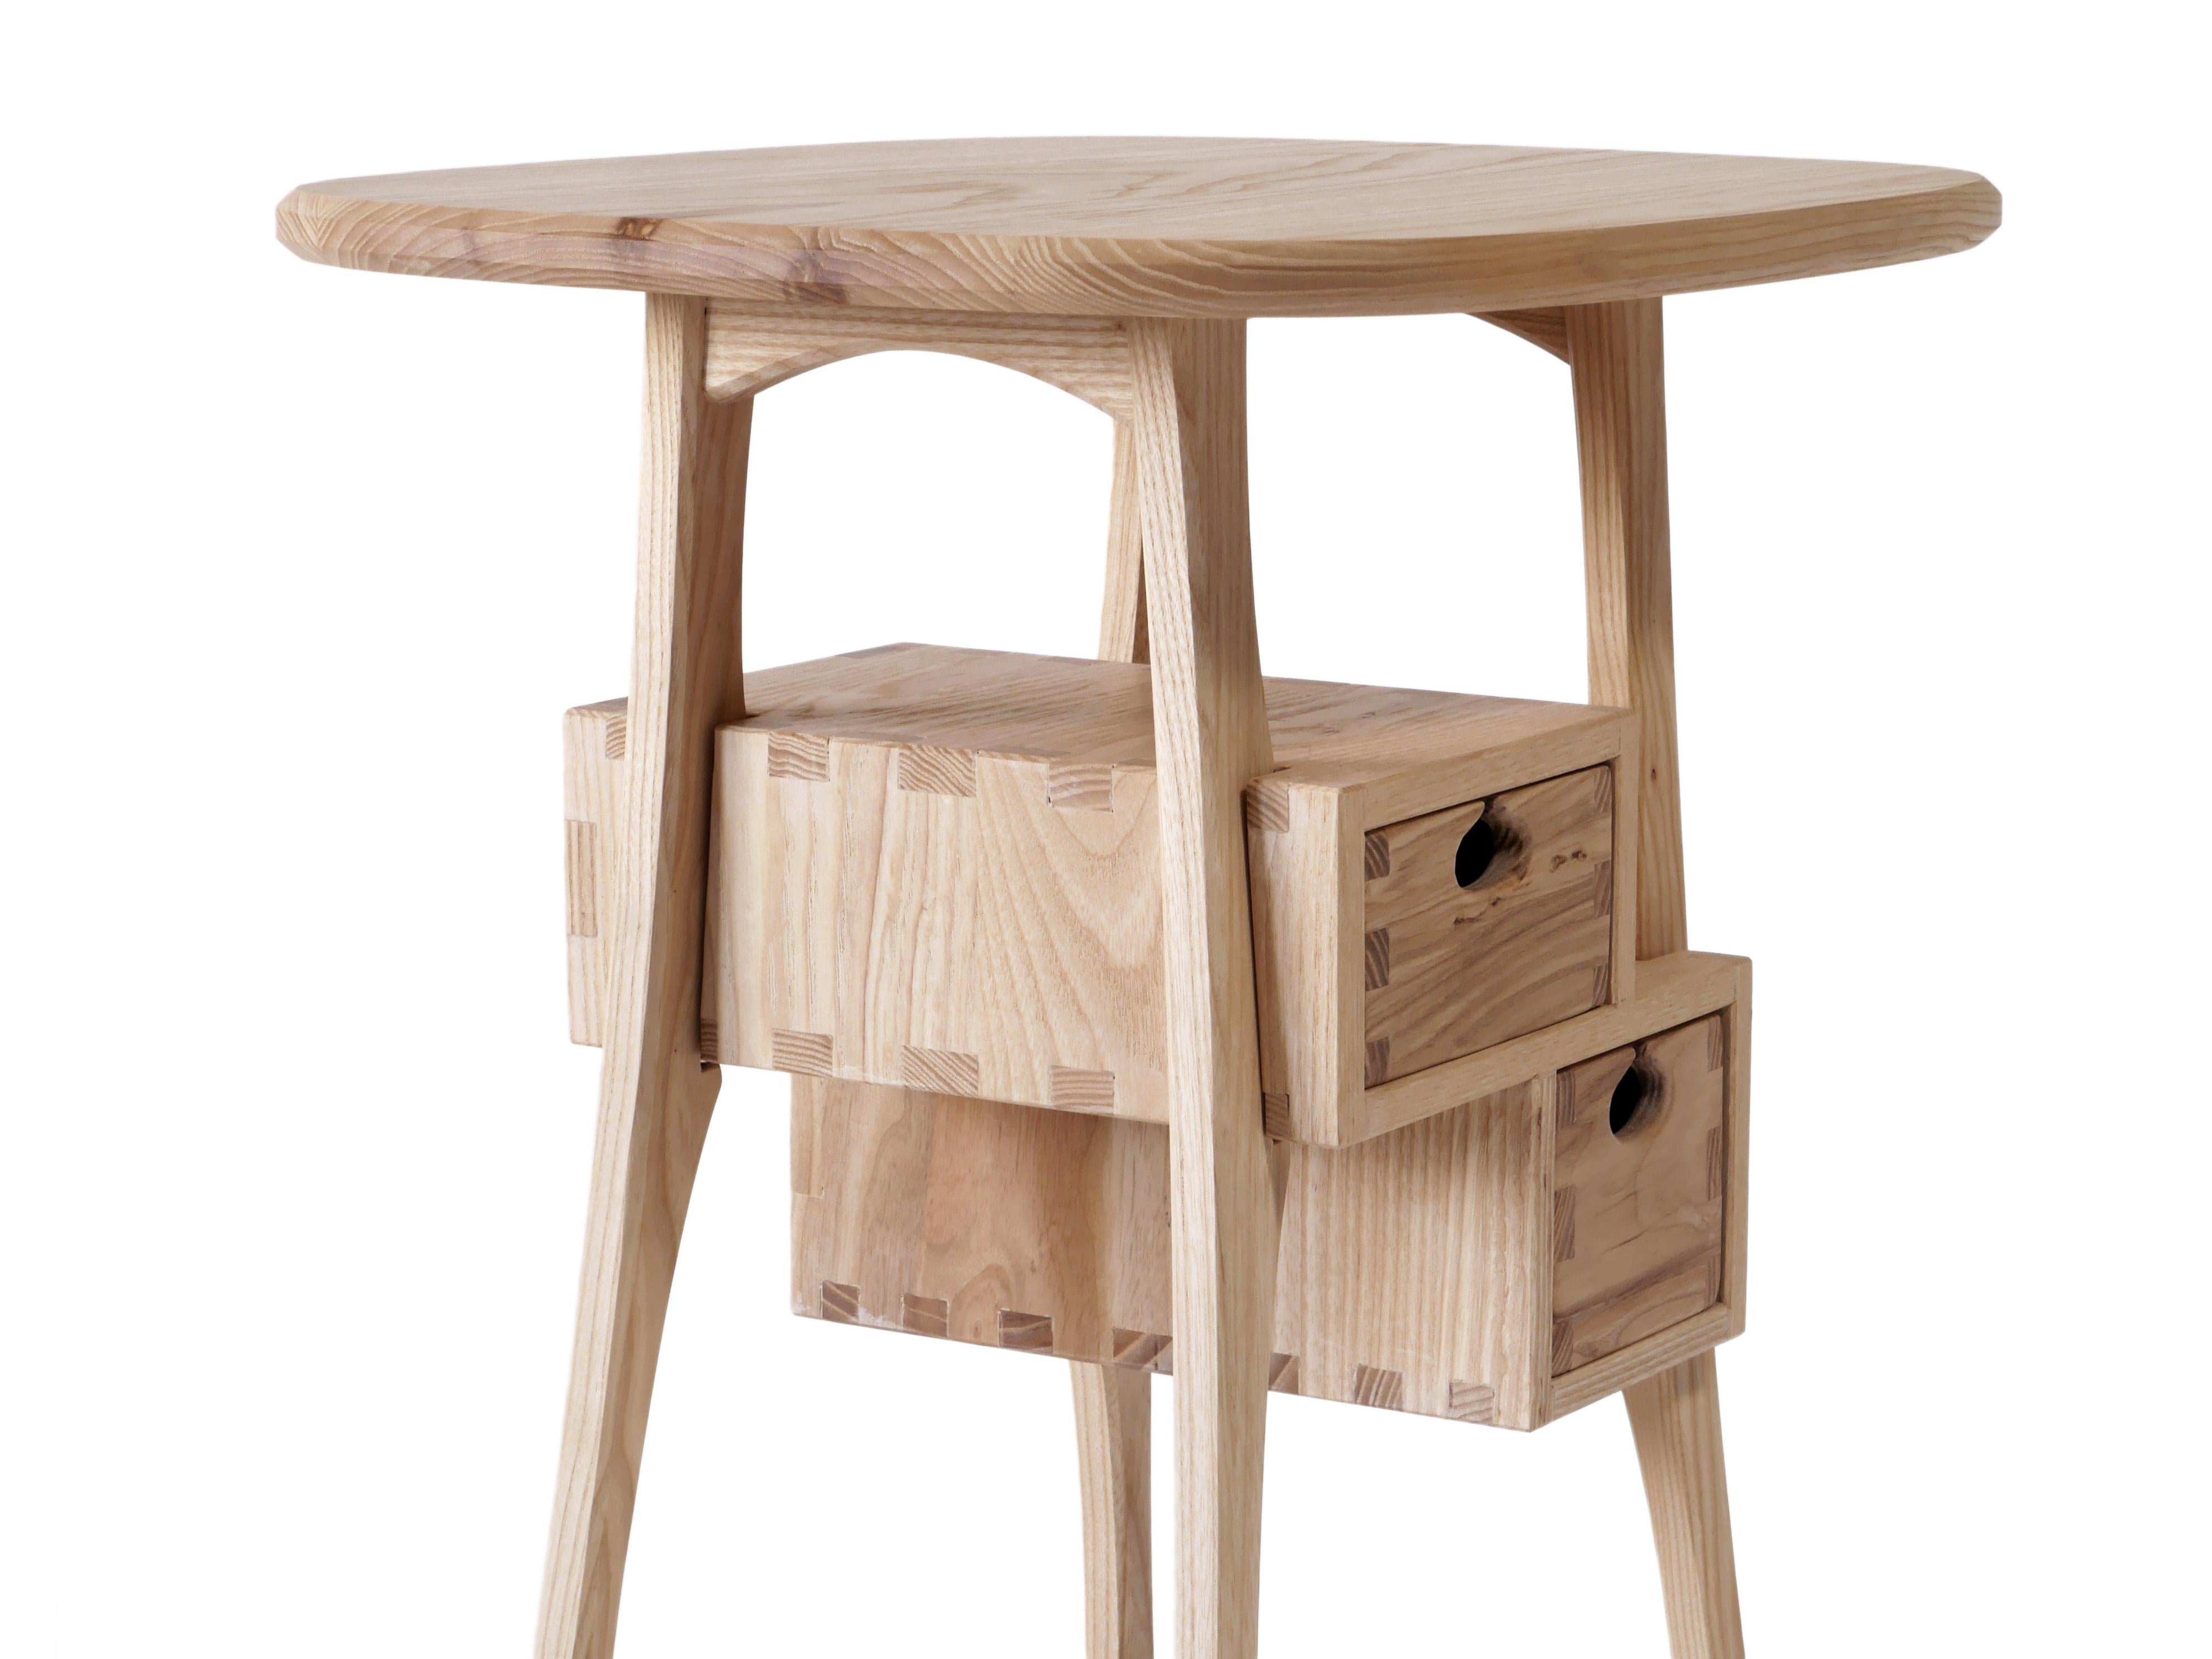 The playful Haar side table is built out of solid white ash hardwood and has two drawers mounted on wooden runners in traditional drawer boxes. It is built with exposed joinery that has been carefully designed for beauty and strength.

Each piece is